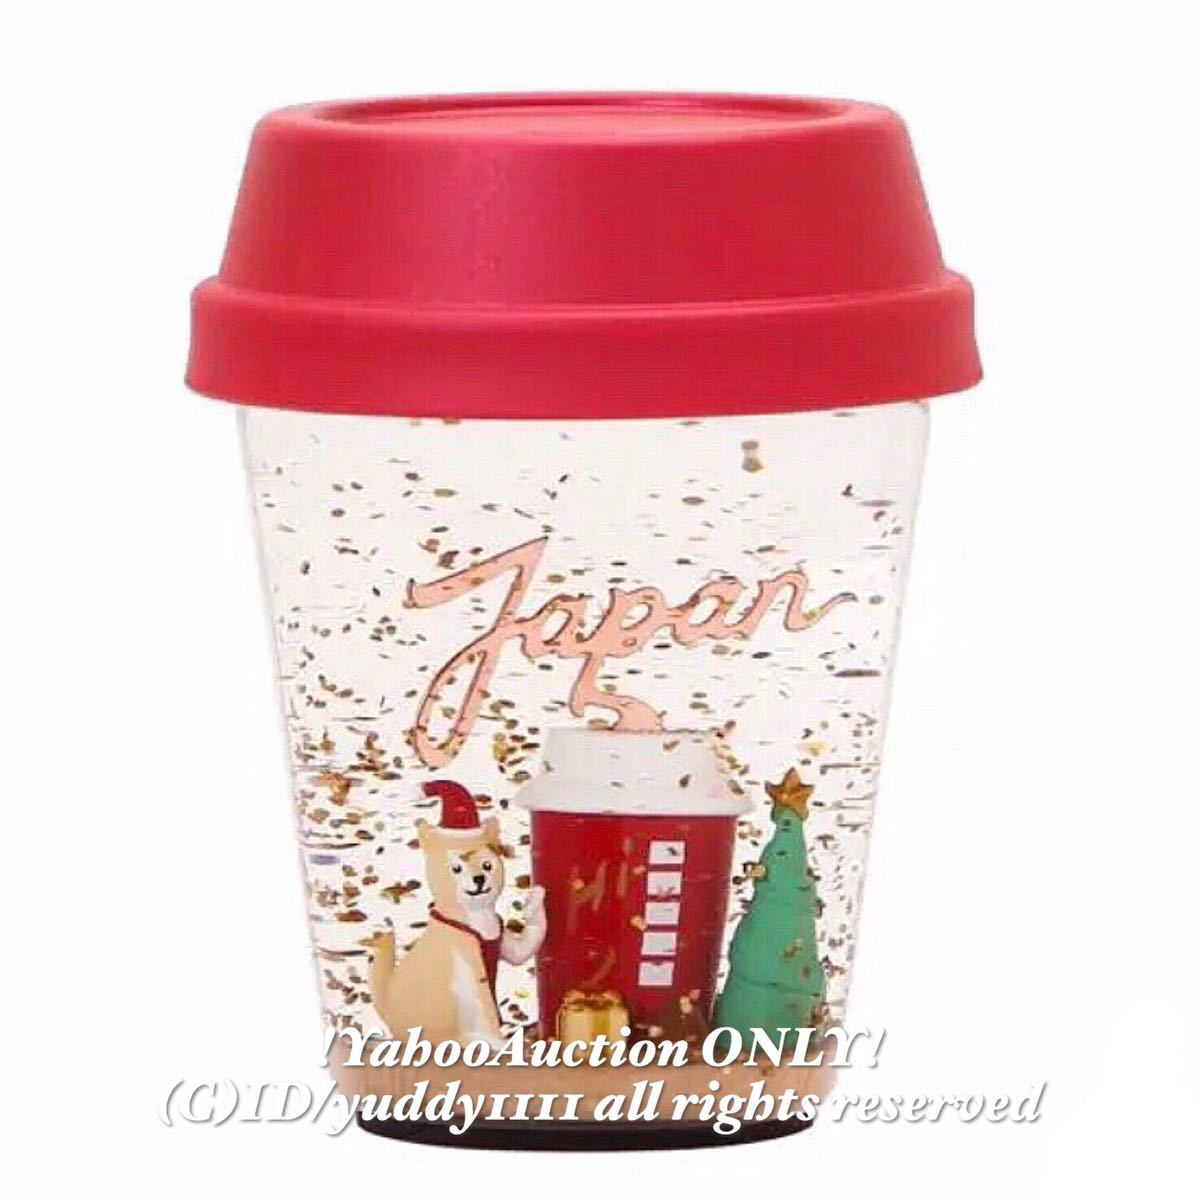  new goods carefuly selected Starbucks Starbucks Hori te-2019 snow dome TOGO RED CUP limitation shopping bag / gift box Japan limitation start ba prompt decision 